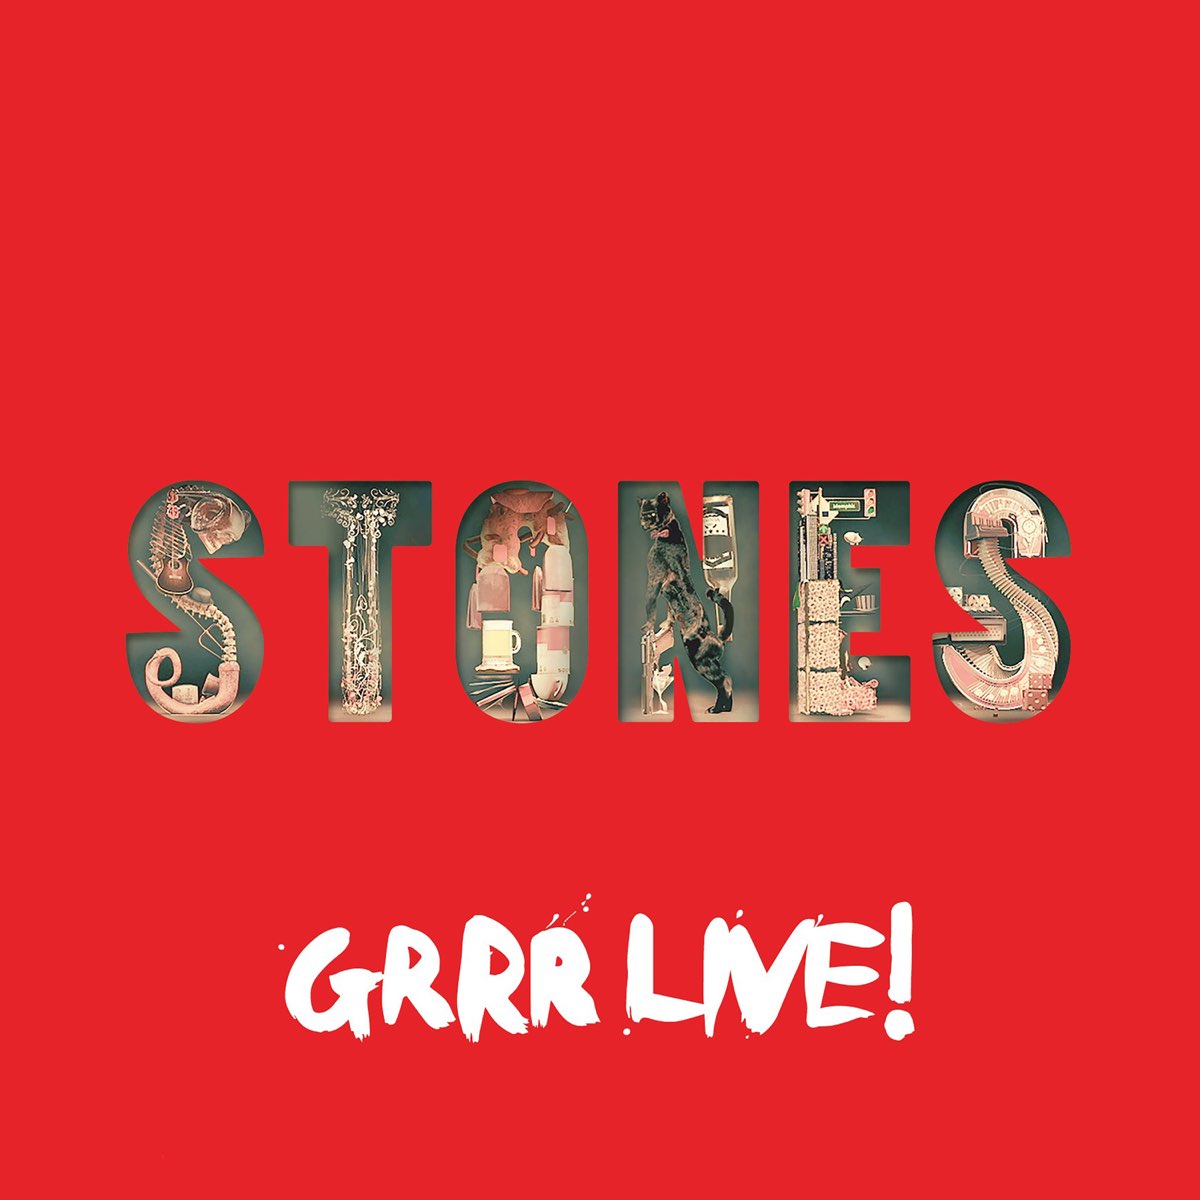 GRRR Live! (Live) by The Rolling Stones on Apple Music